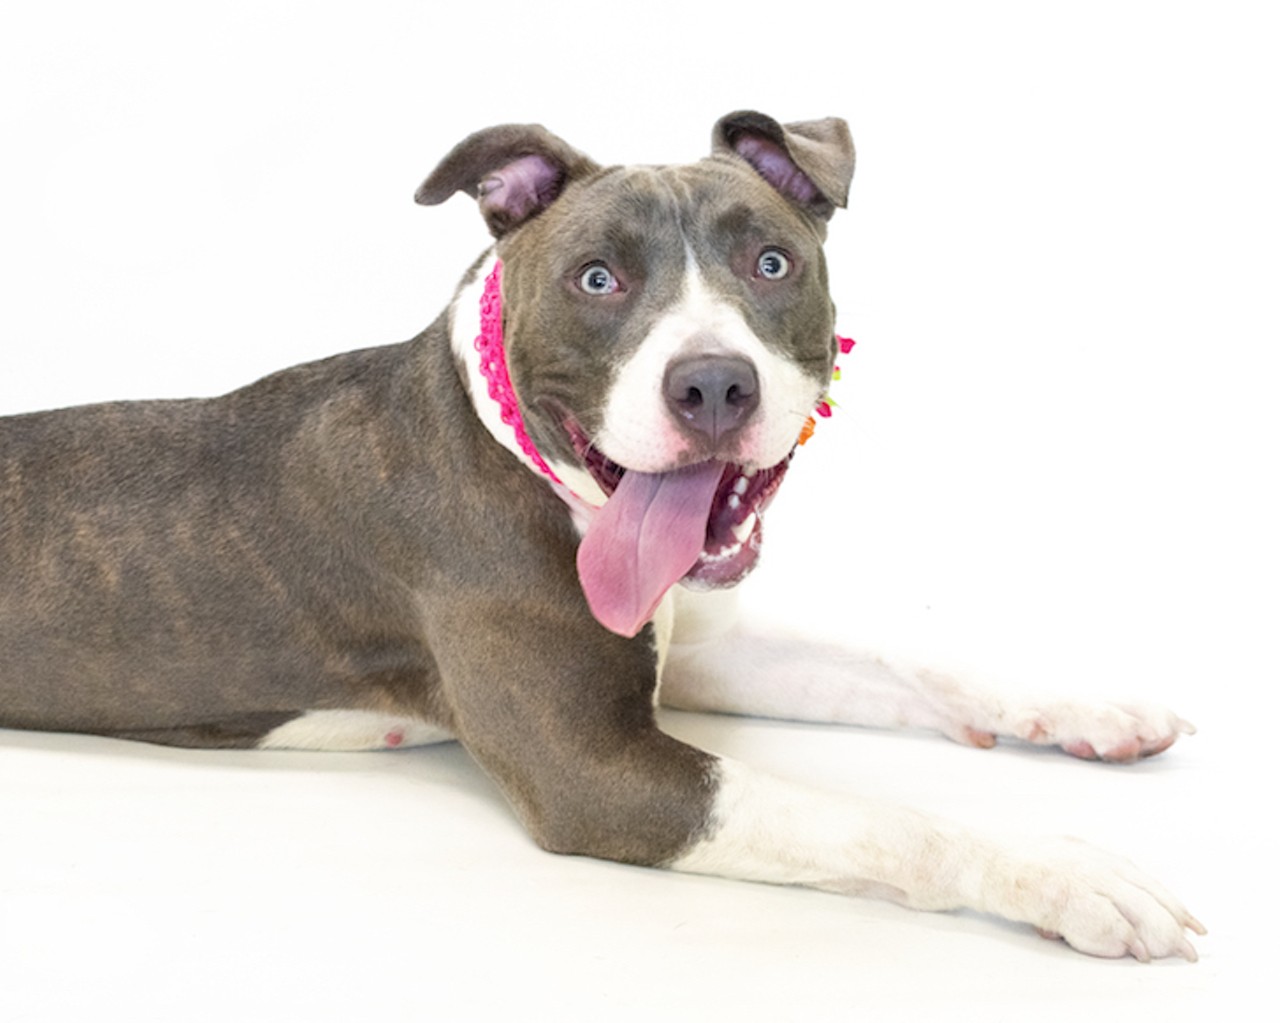 25 adoptable pups available right now at Orange County Animal Services